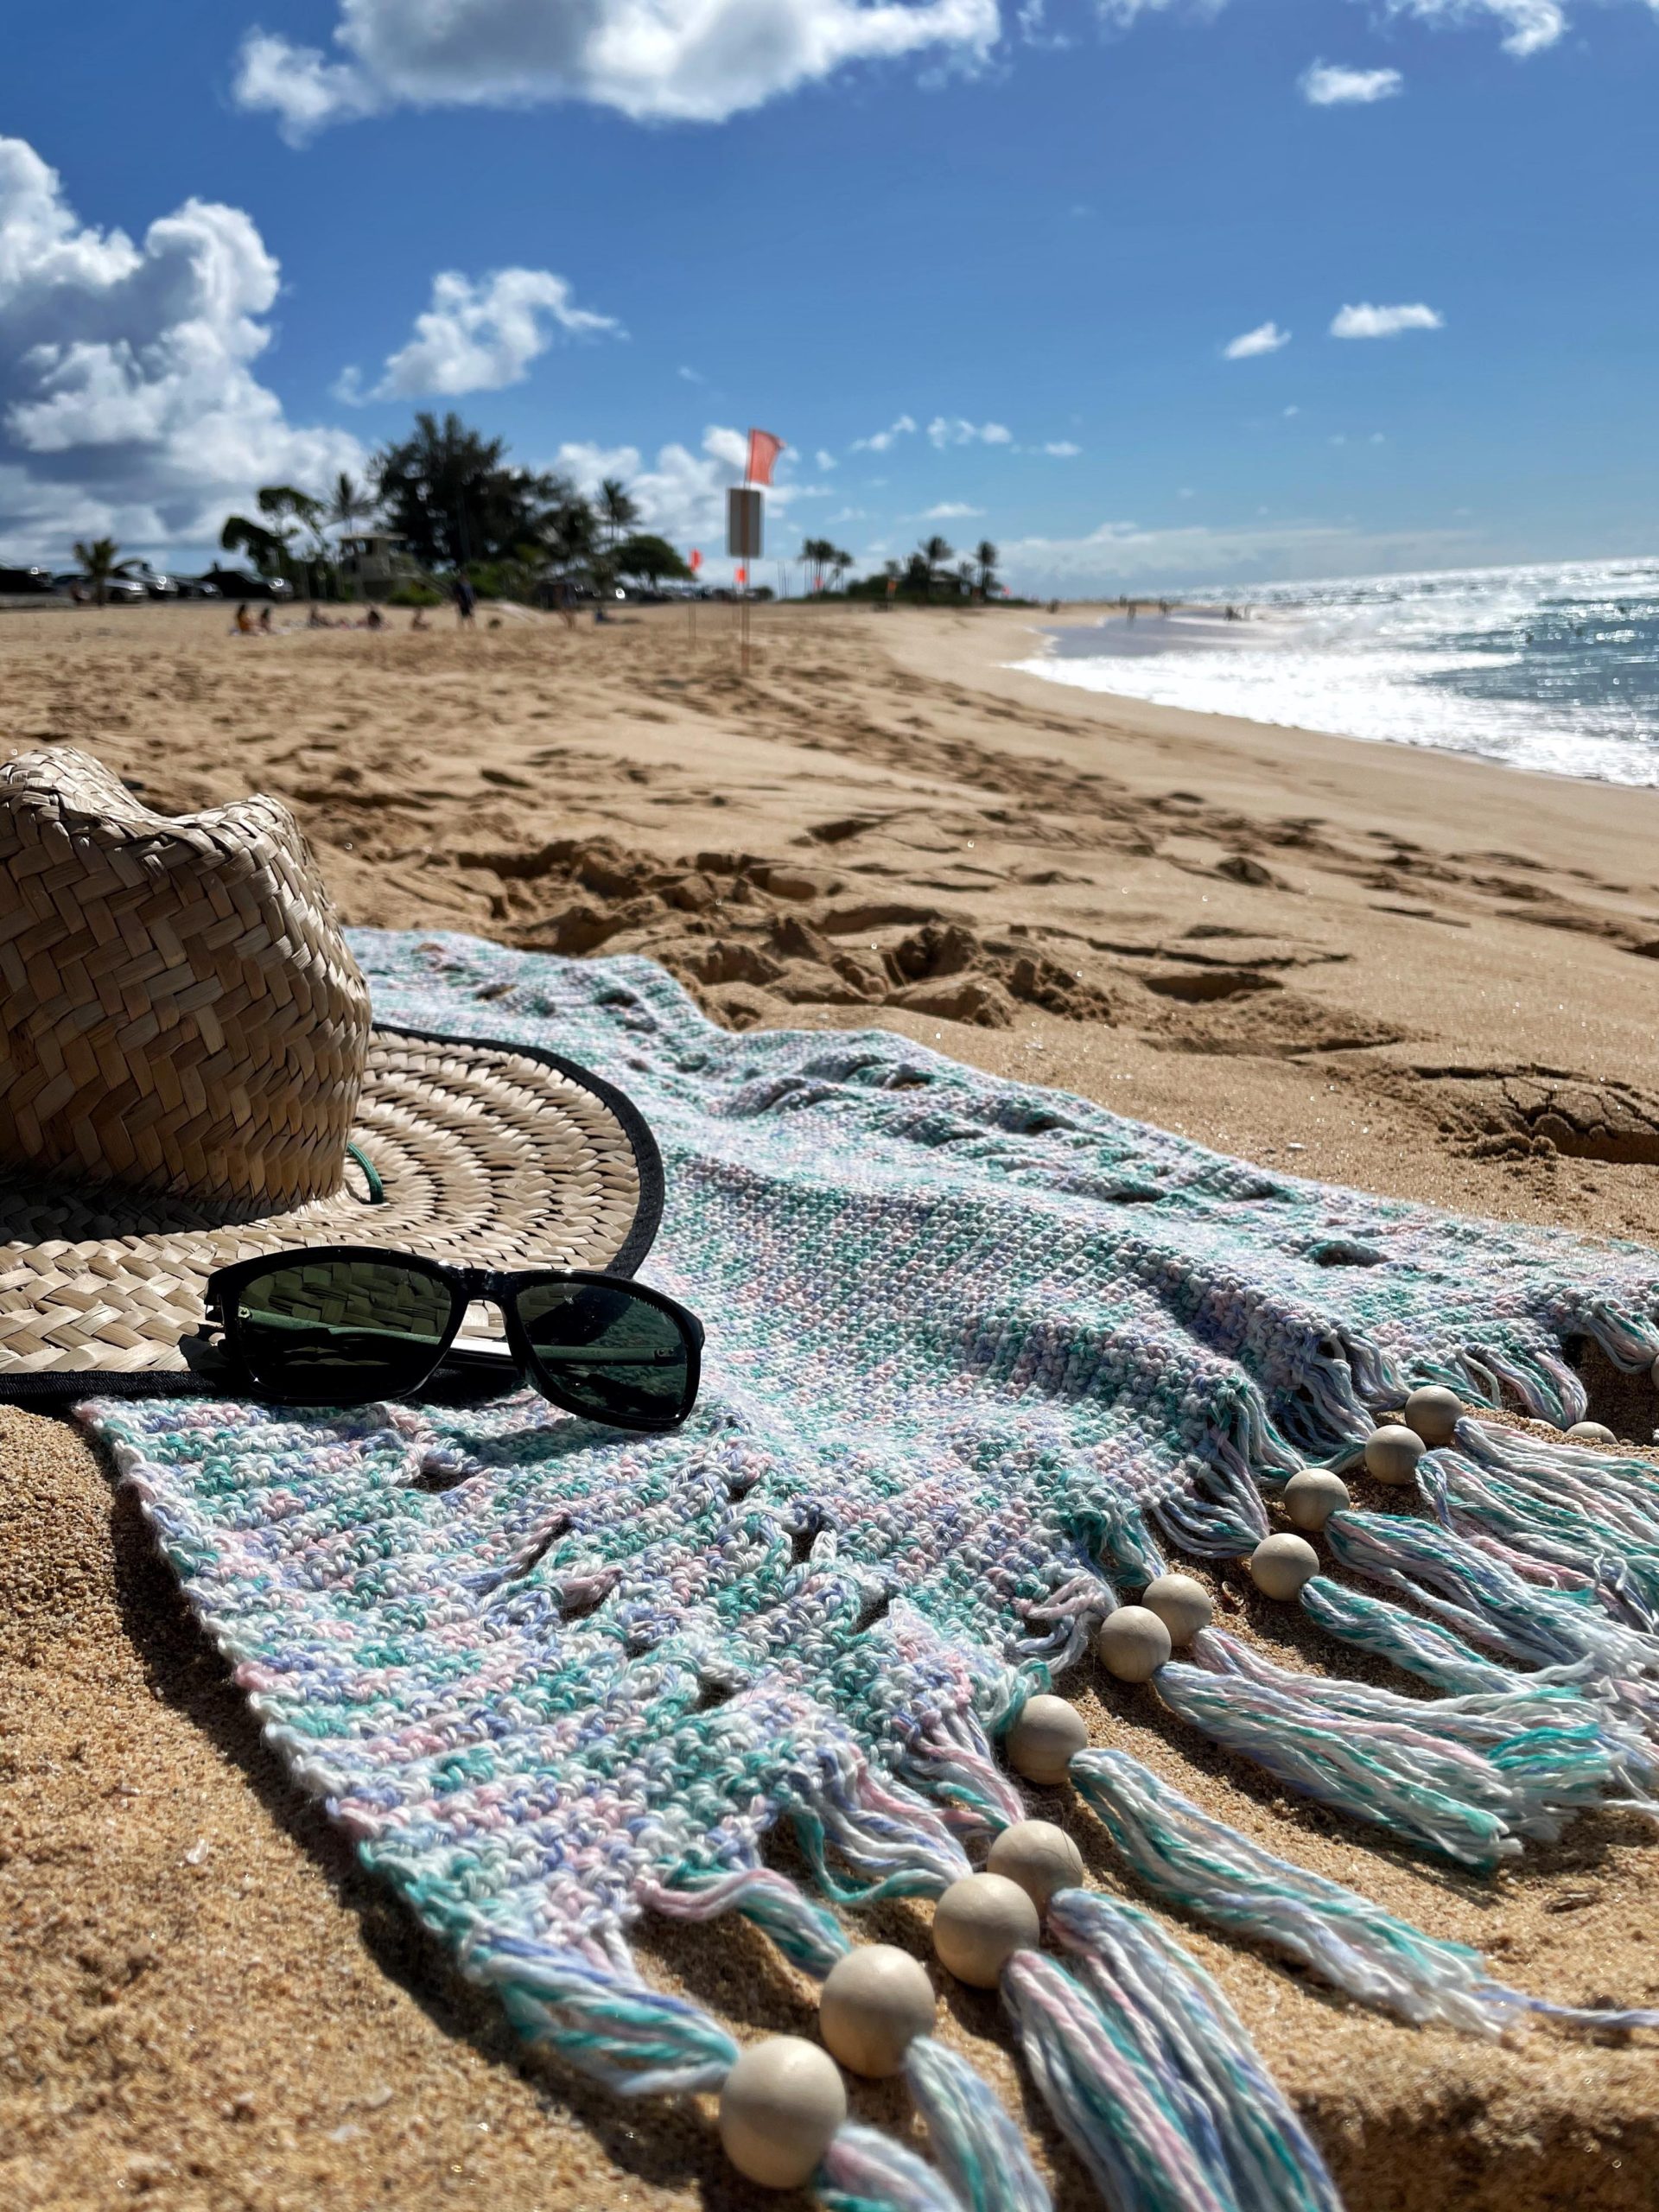 crochet beach towel on a sandy beach with a hat and sunglasses on top of it